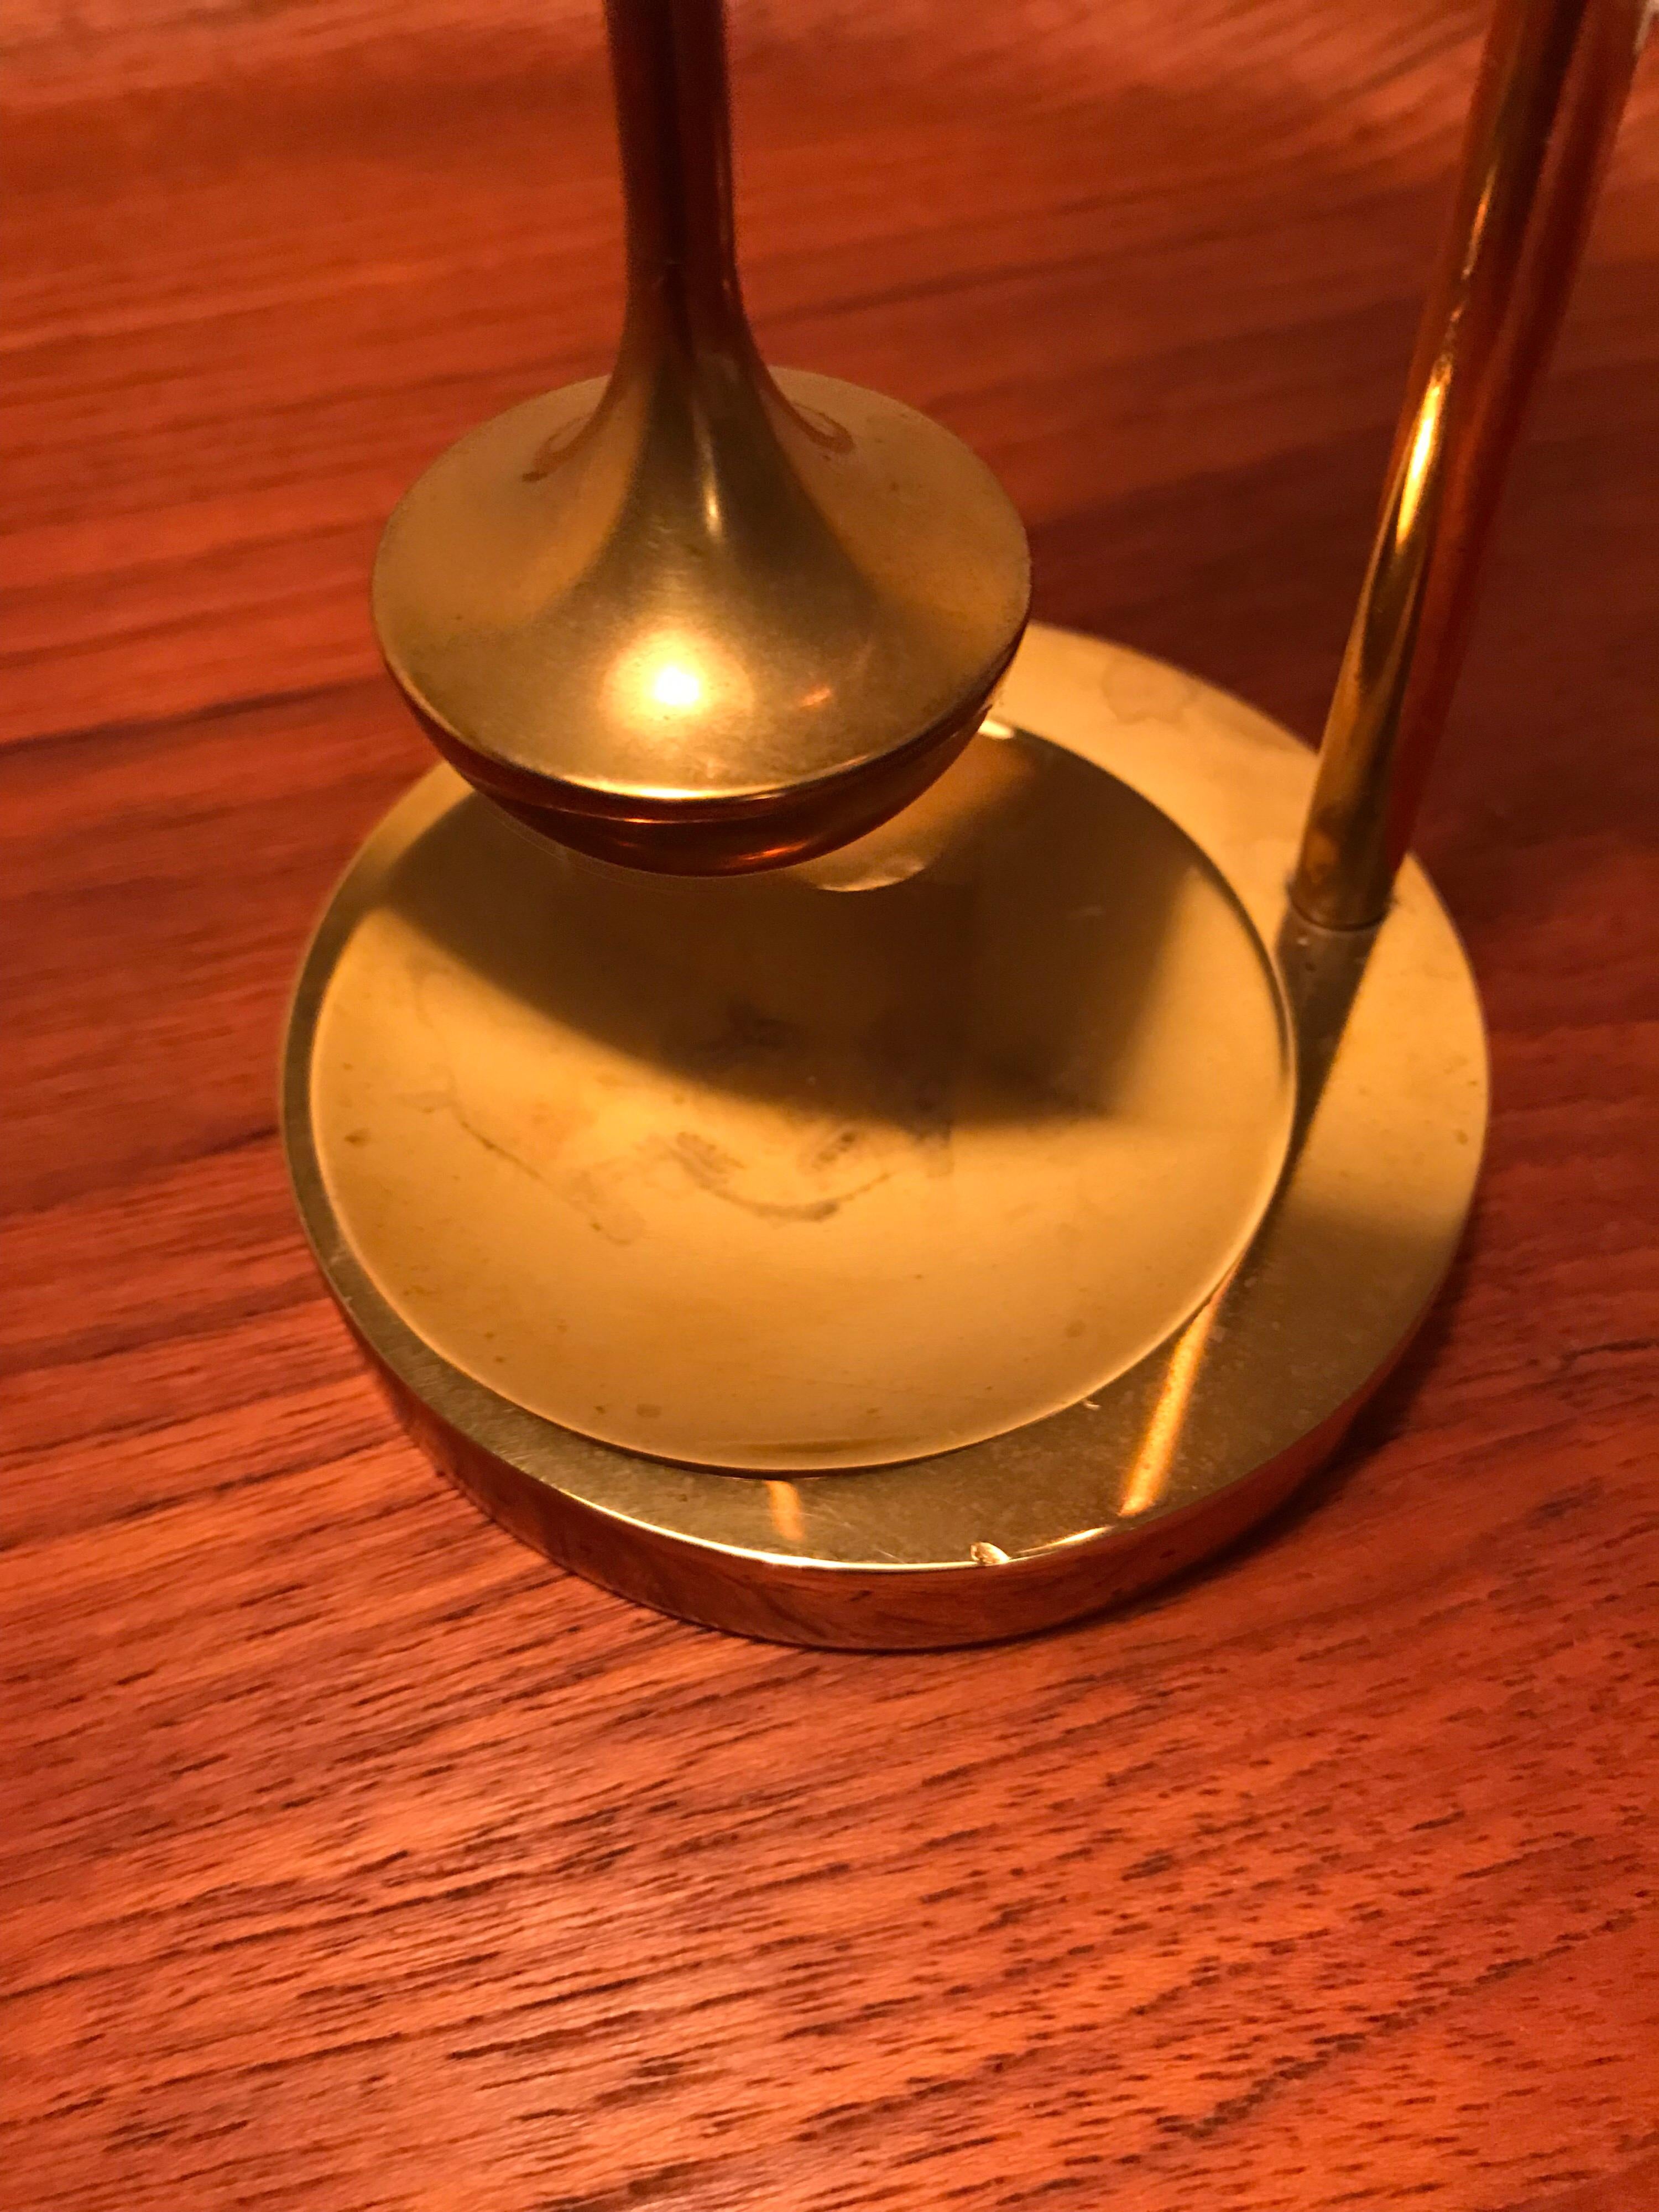 Vintage brass oil lamp handmade in Denmark and designed by Ilse Ammonsen 
Adjustable height and a self leveling gyro function 
Engraved on the base “Ilse Ammonsen”.
 